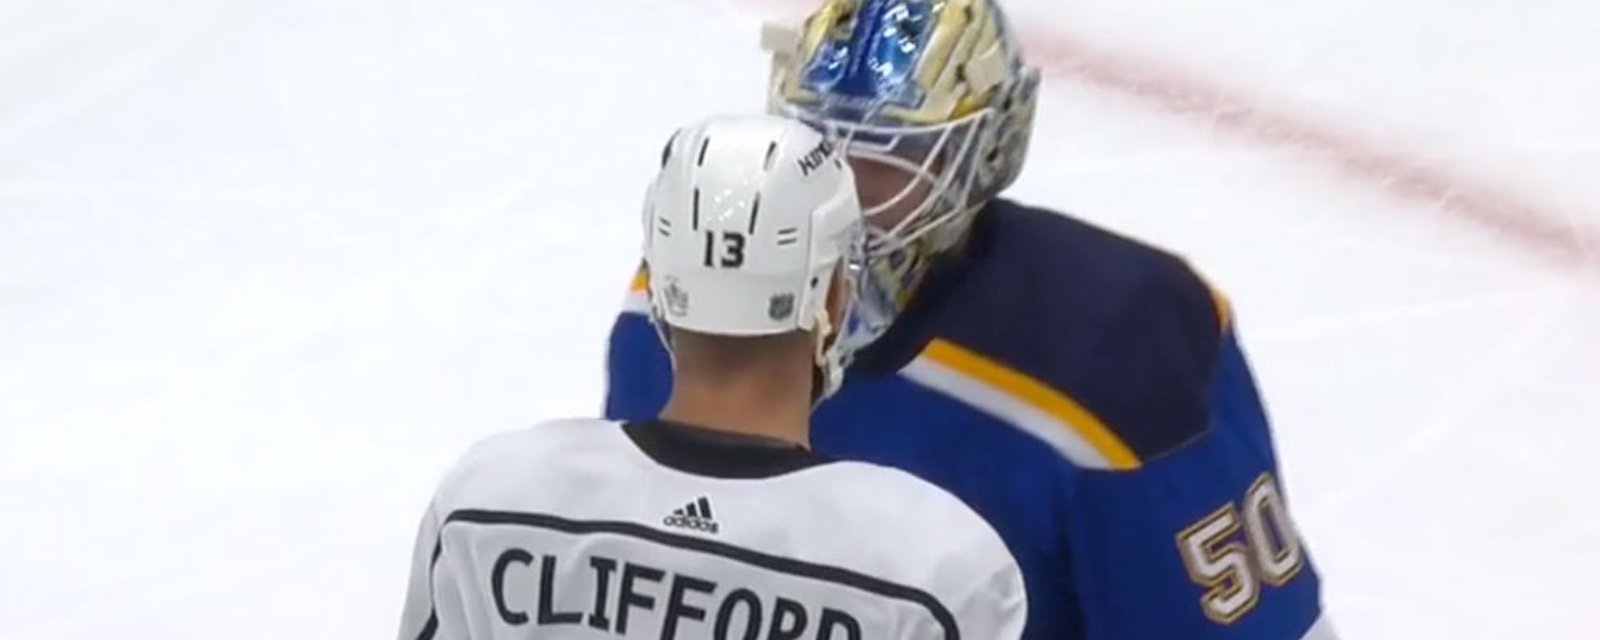 Binnington goes after Clifford and huge scrum ensues! 